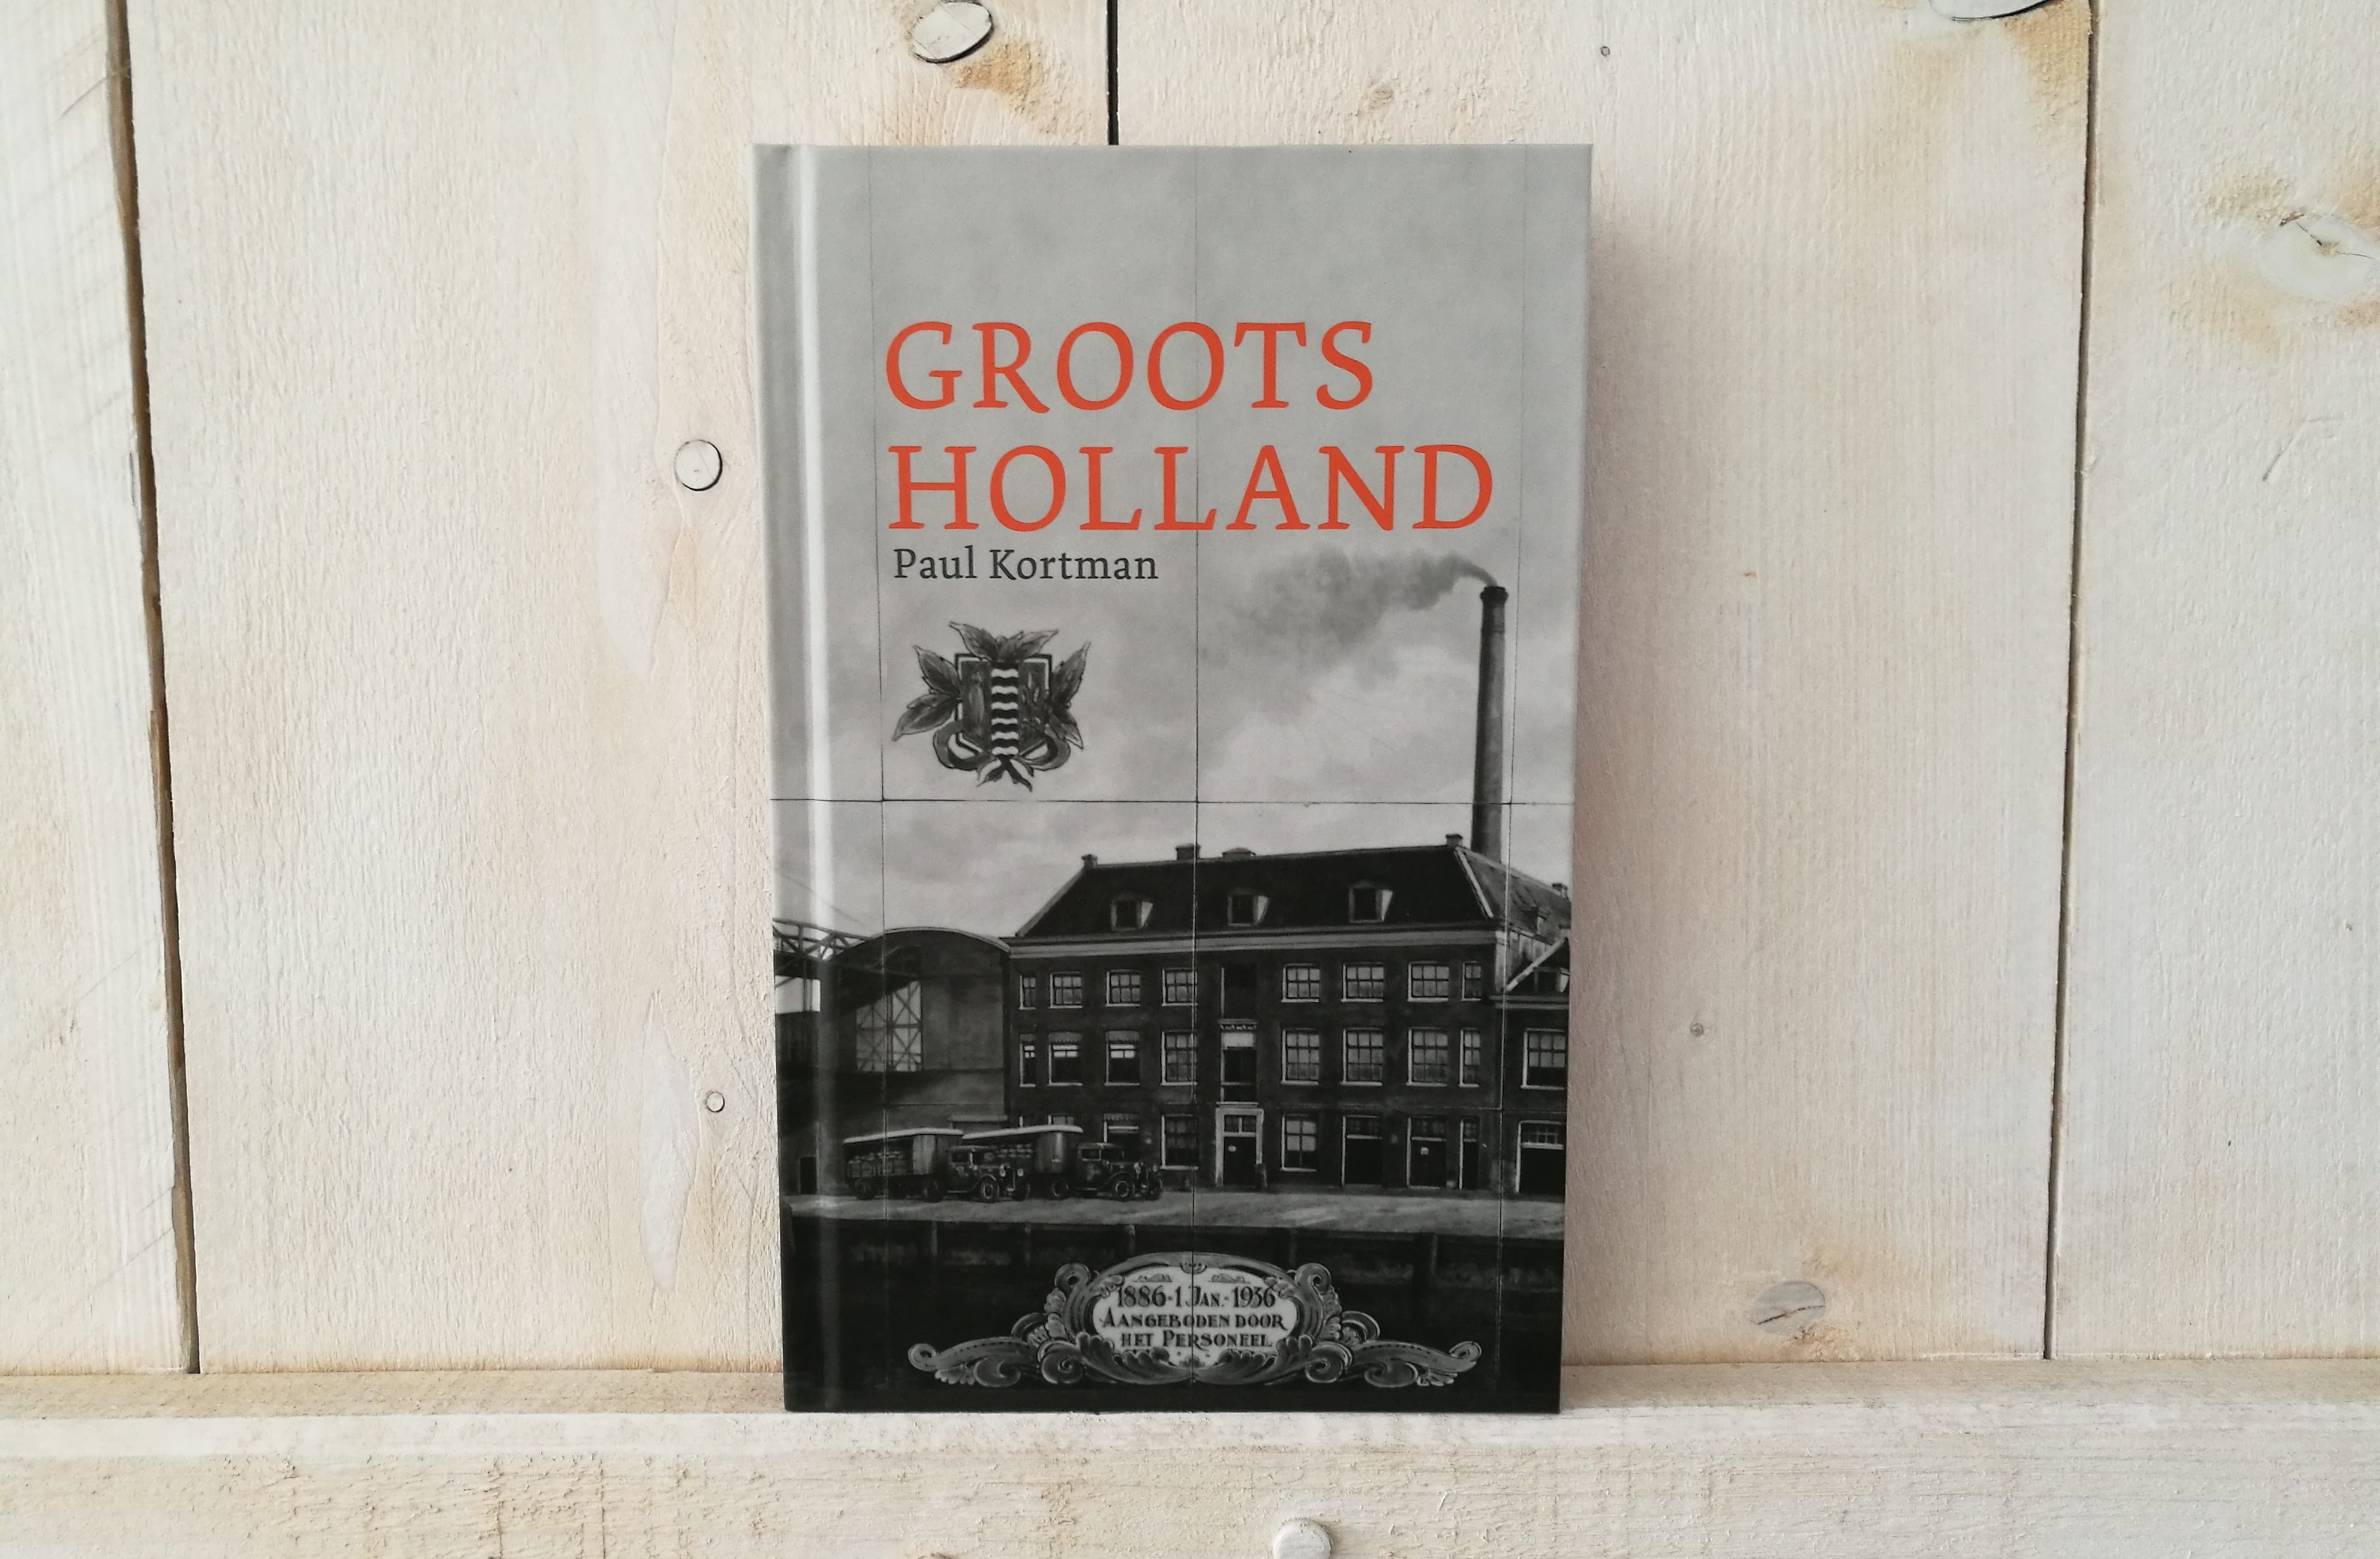 GROOTS HOLLAND